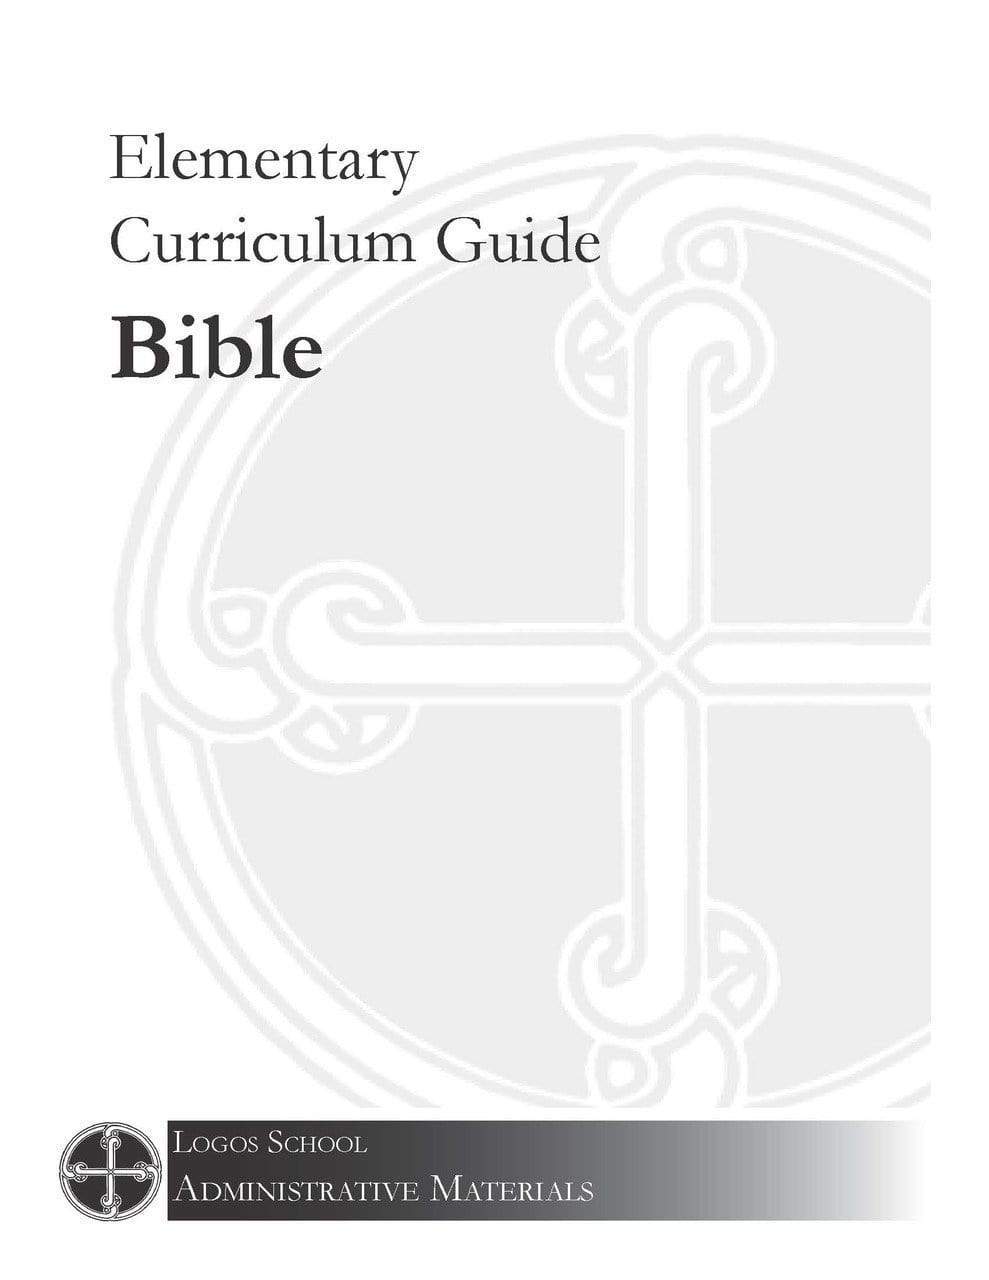 Elementary Curriculum Guide - Bible (Download)